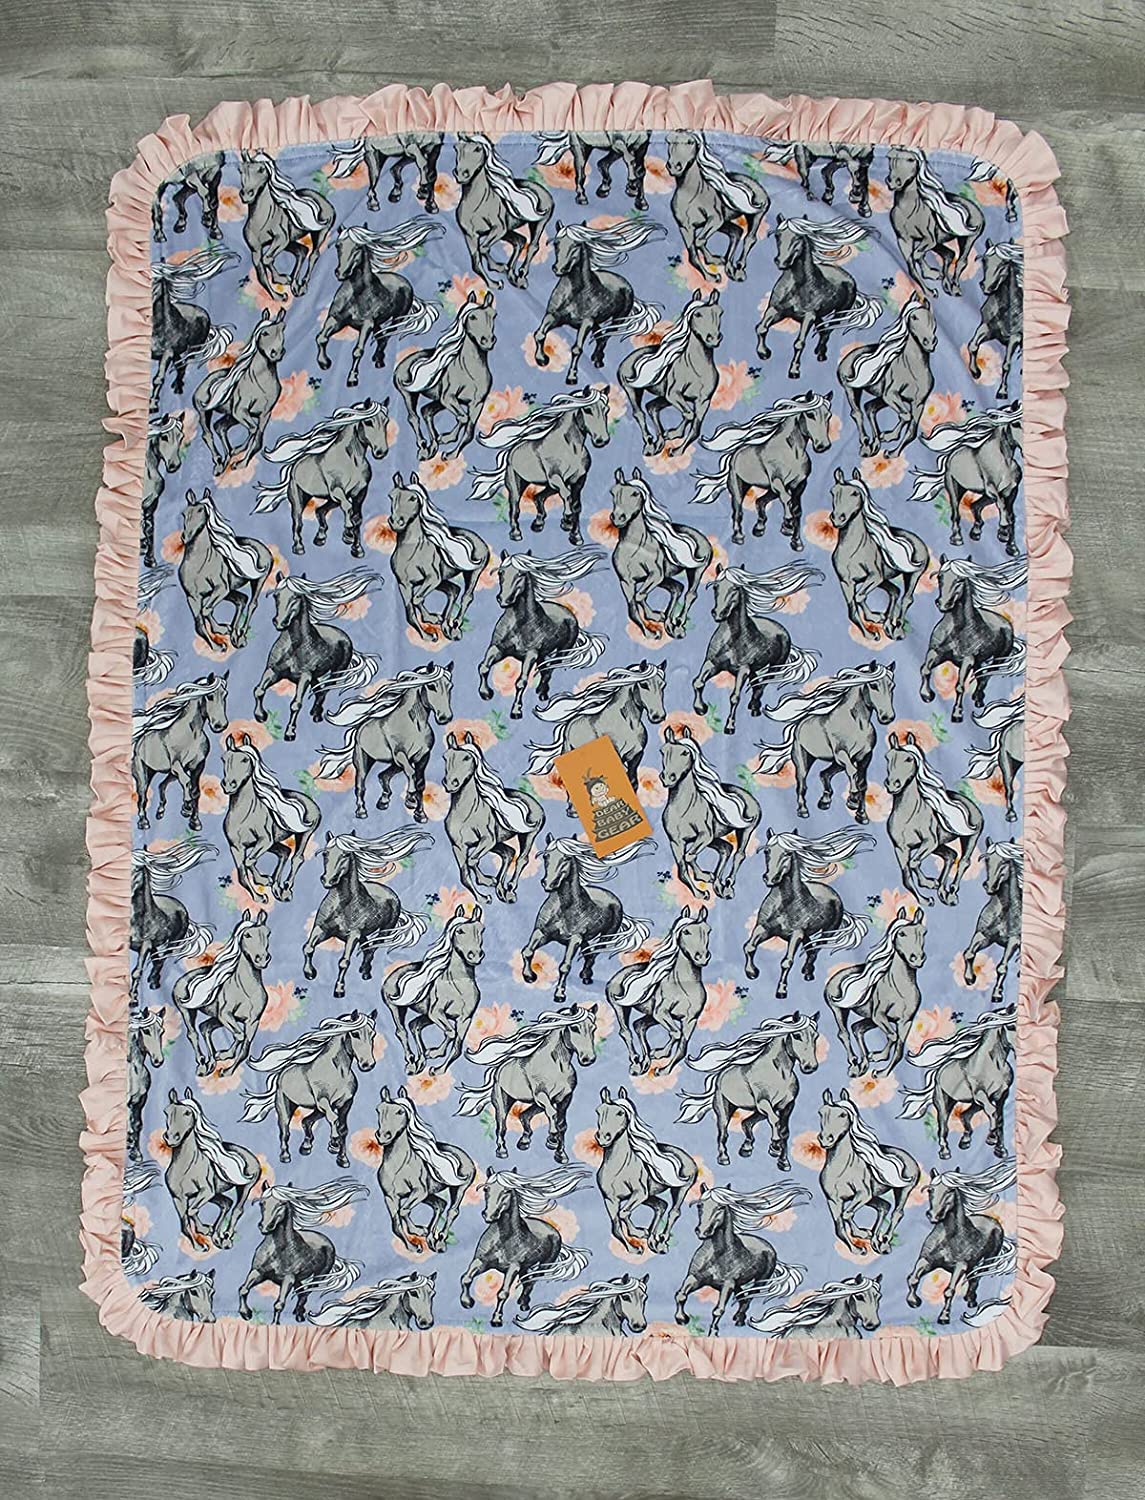 Dear Baby Gear Deluxe Double Layer Soft Minky Baby Blanket – Gray Horses Lavender Pink Peonies Floral / Pink Ruffle, Exclusive Print, 40 x 30 Inches